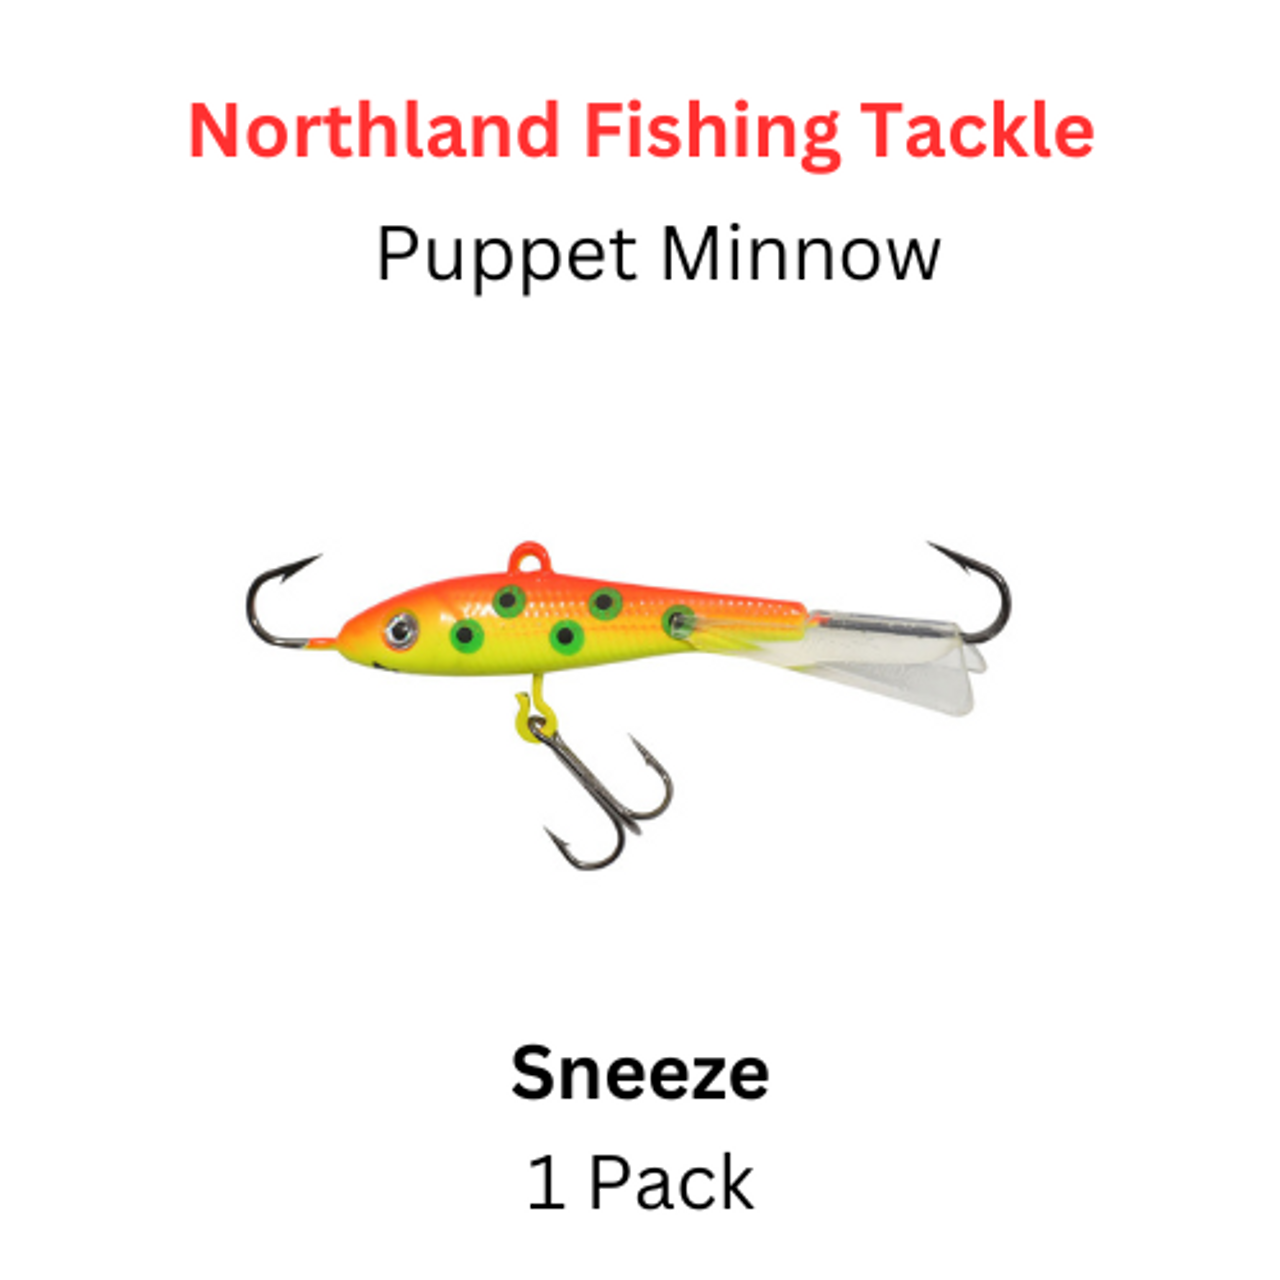 NORTHLAND FISHING TACKLE: 9/16 oz Puppet Minnow SNEEZE